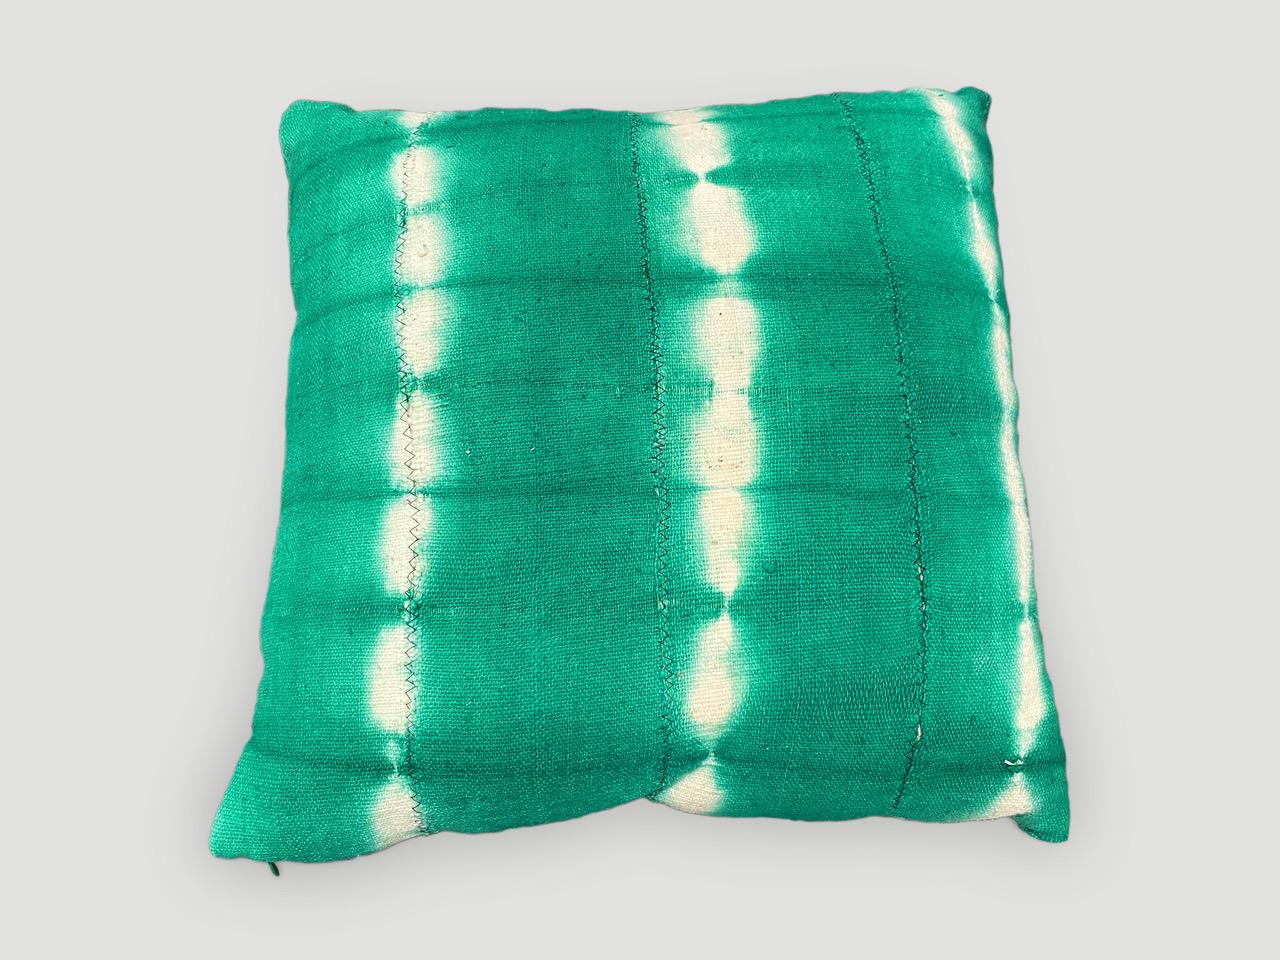 Green over-dyed mud cloth Mali textile from West Africa made into a pillow. Double backed with concealed zipper. Insert included. We have a collection. The price reflects the one shown.

Andrianna Shamaris. The Leader In Modern Organic Design.